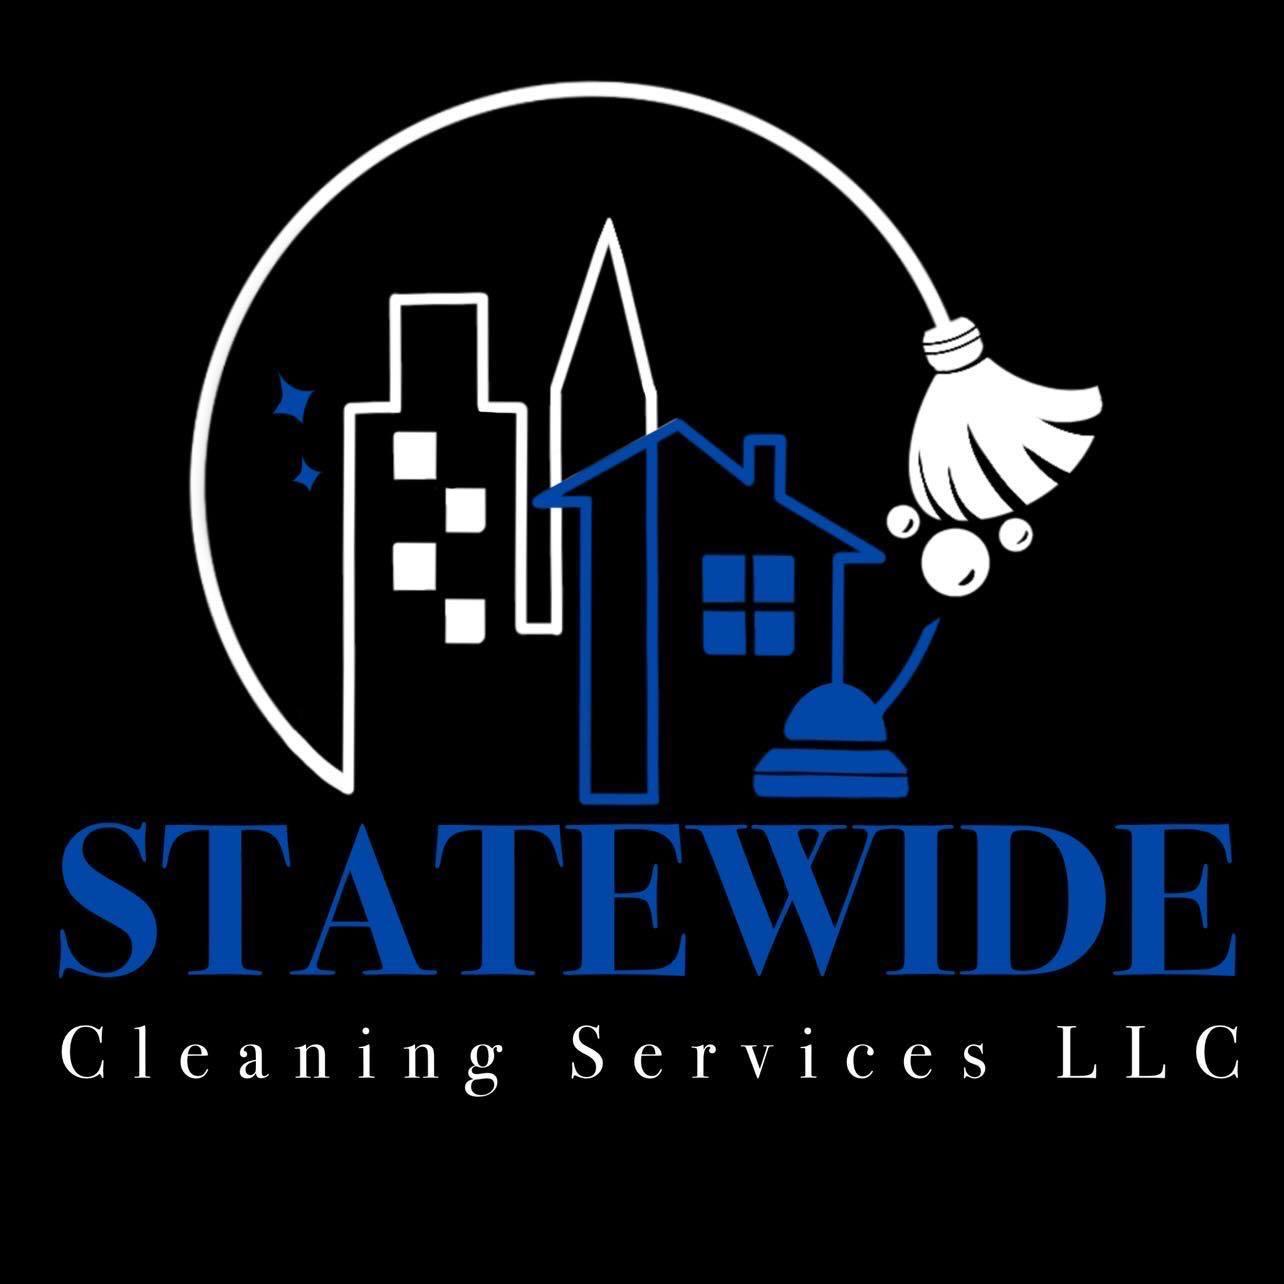 Statewide cleaning services Philadelphia (215)602-3489